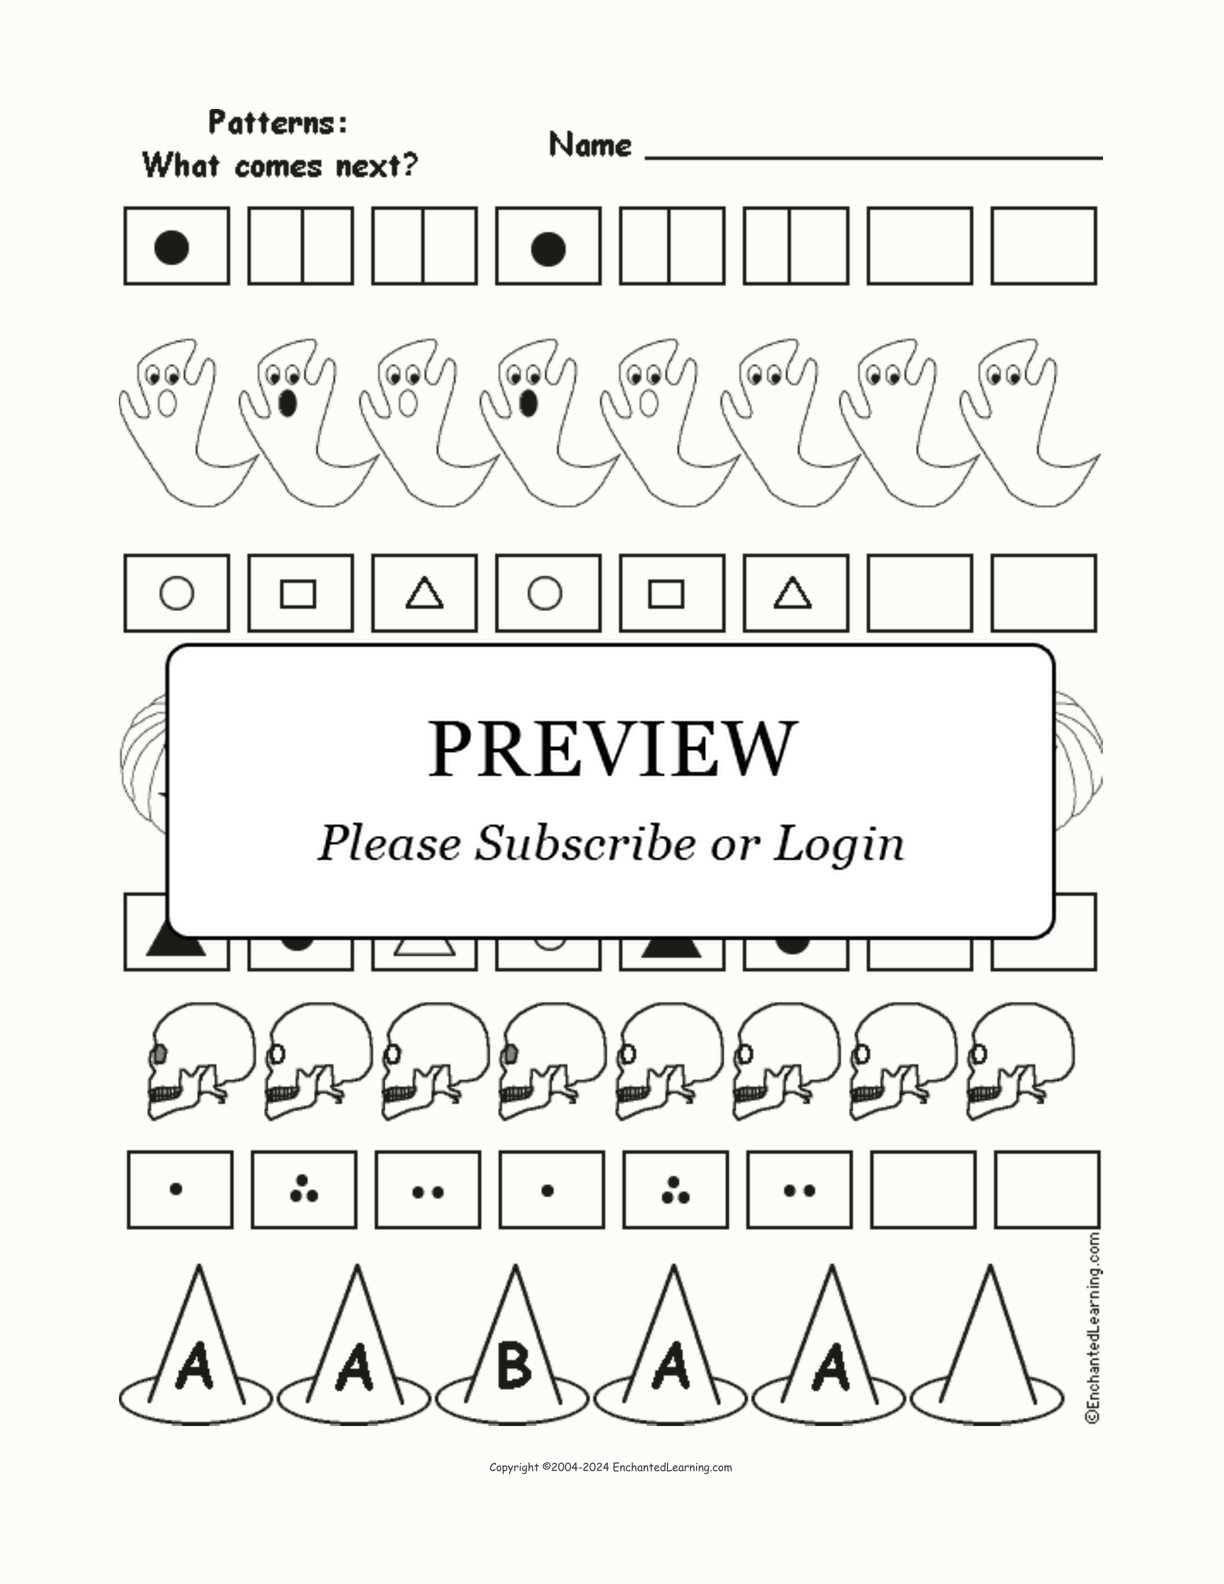 What Comes Next In The Halloween Patterns? interactive worksheet page 1